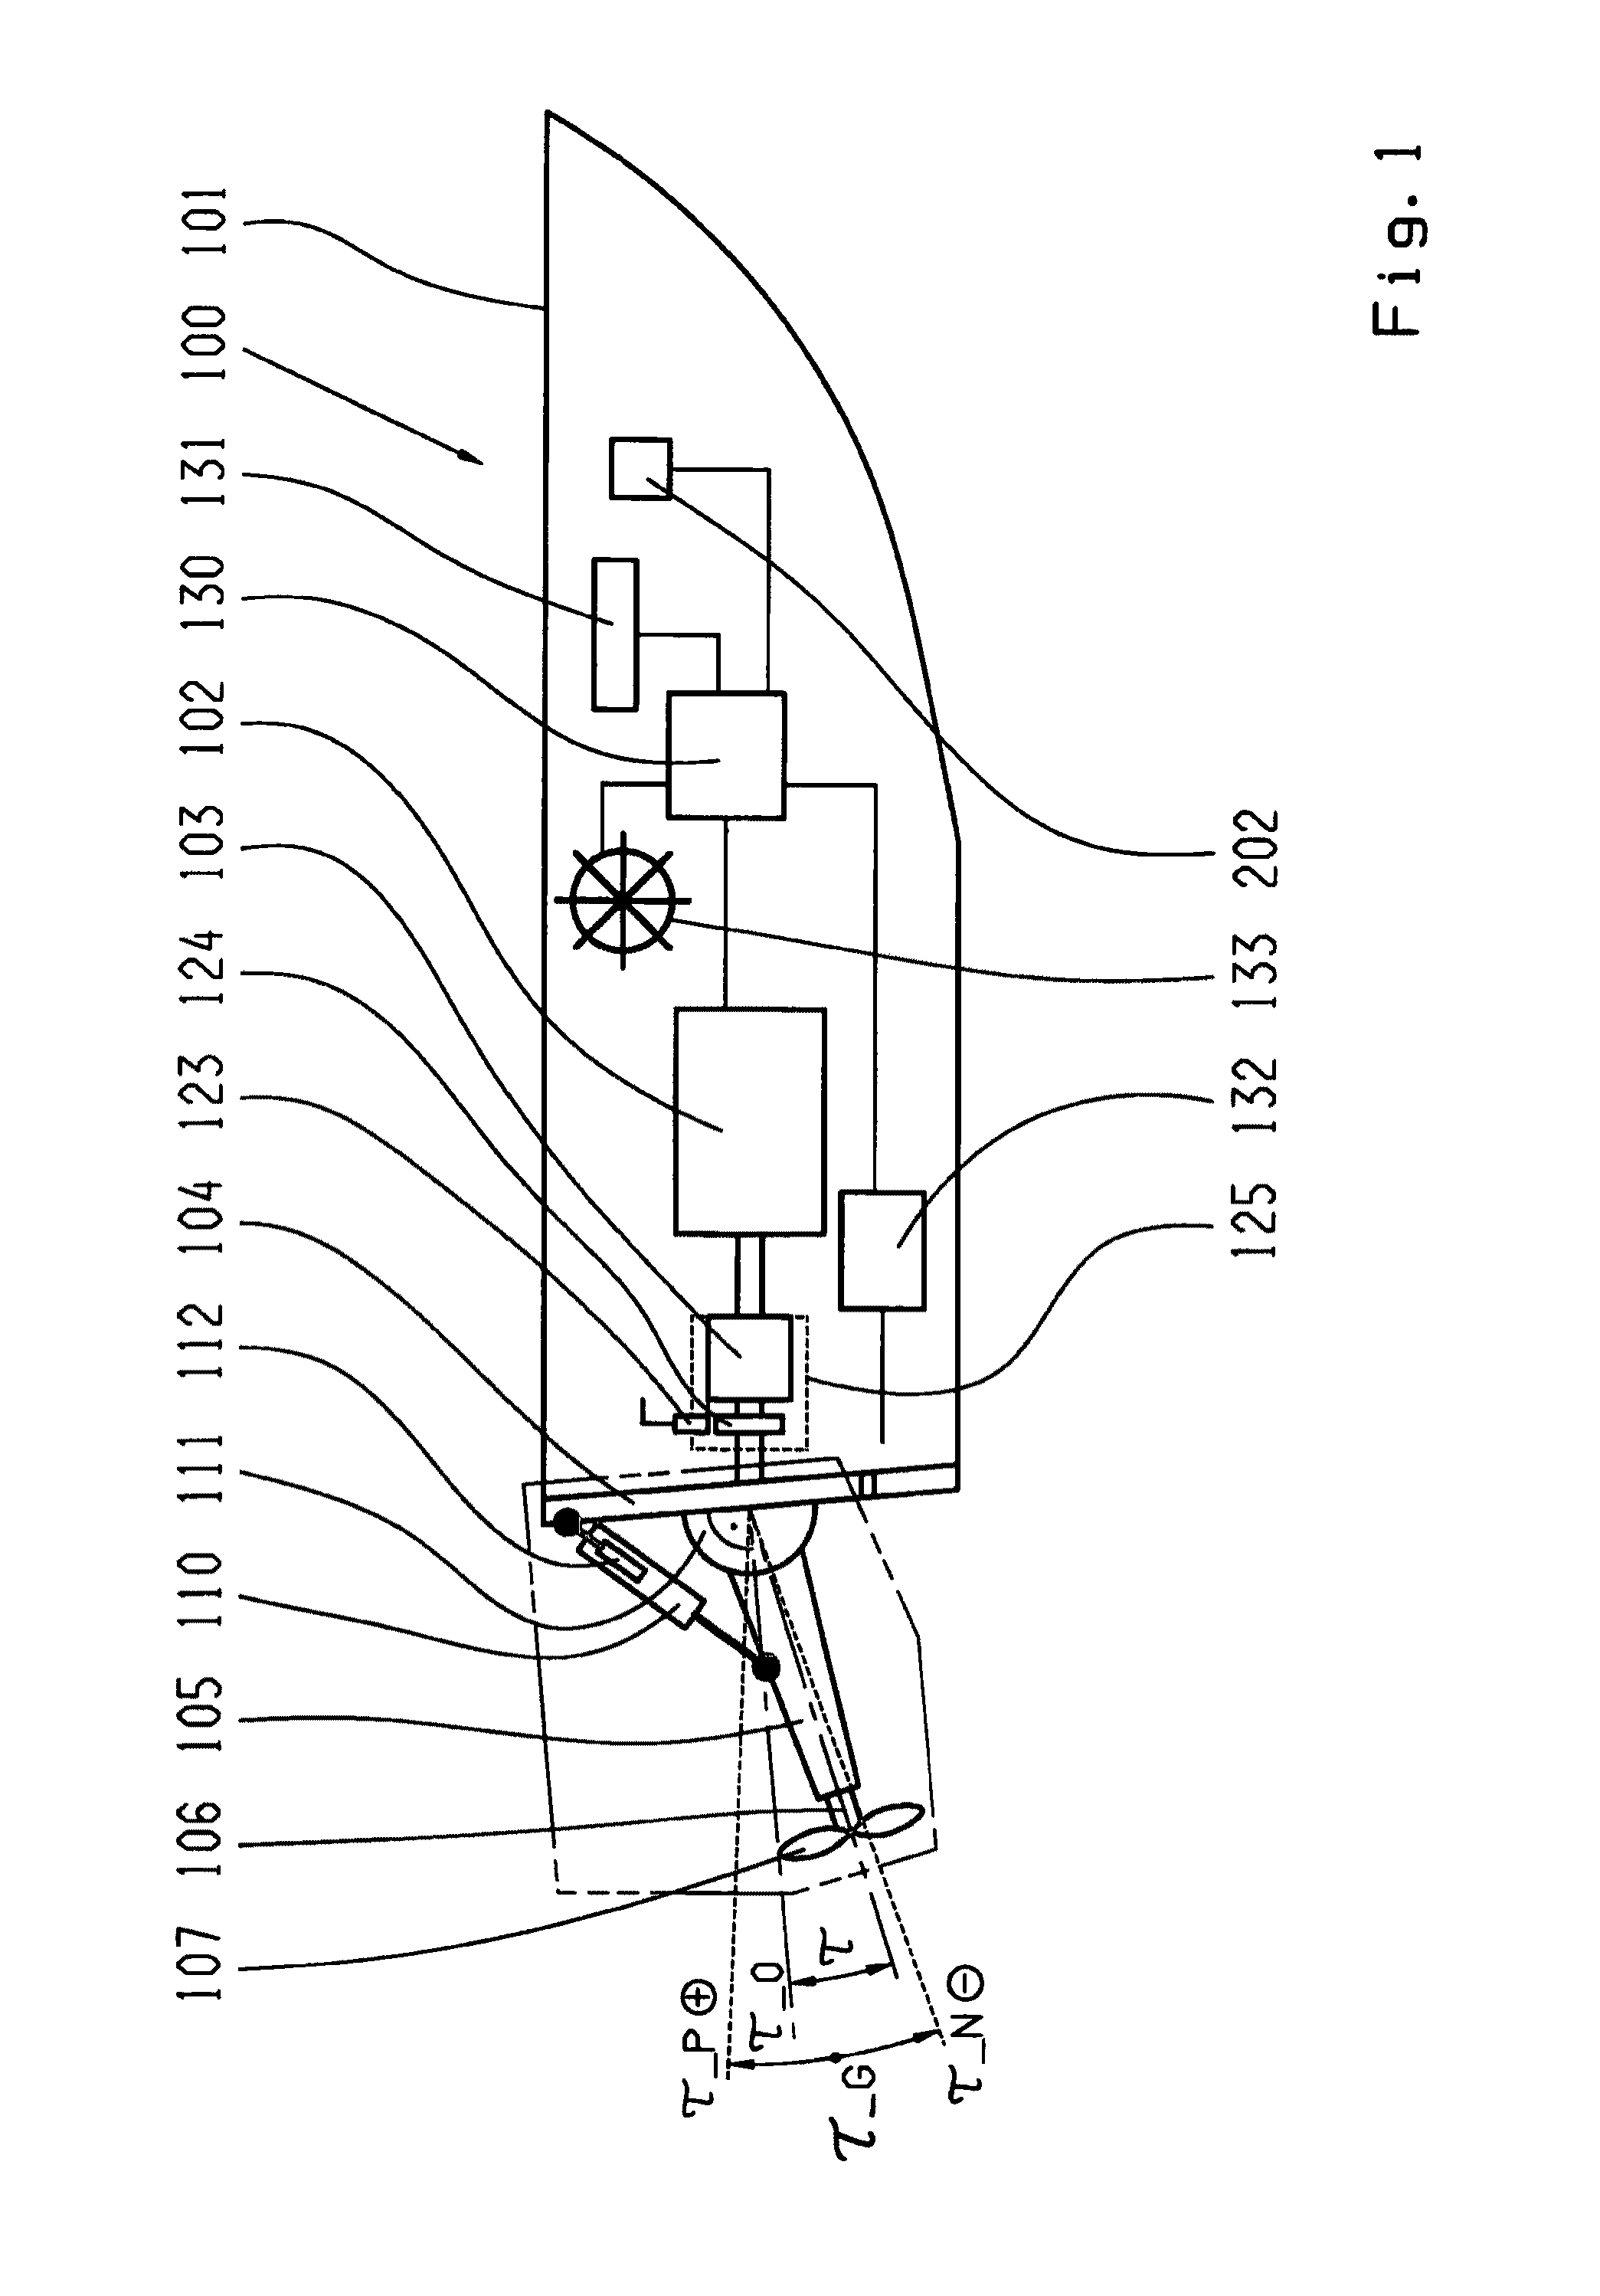 Method for controlling a watercraft having a surface drive